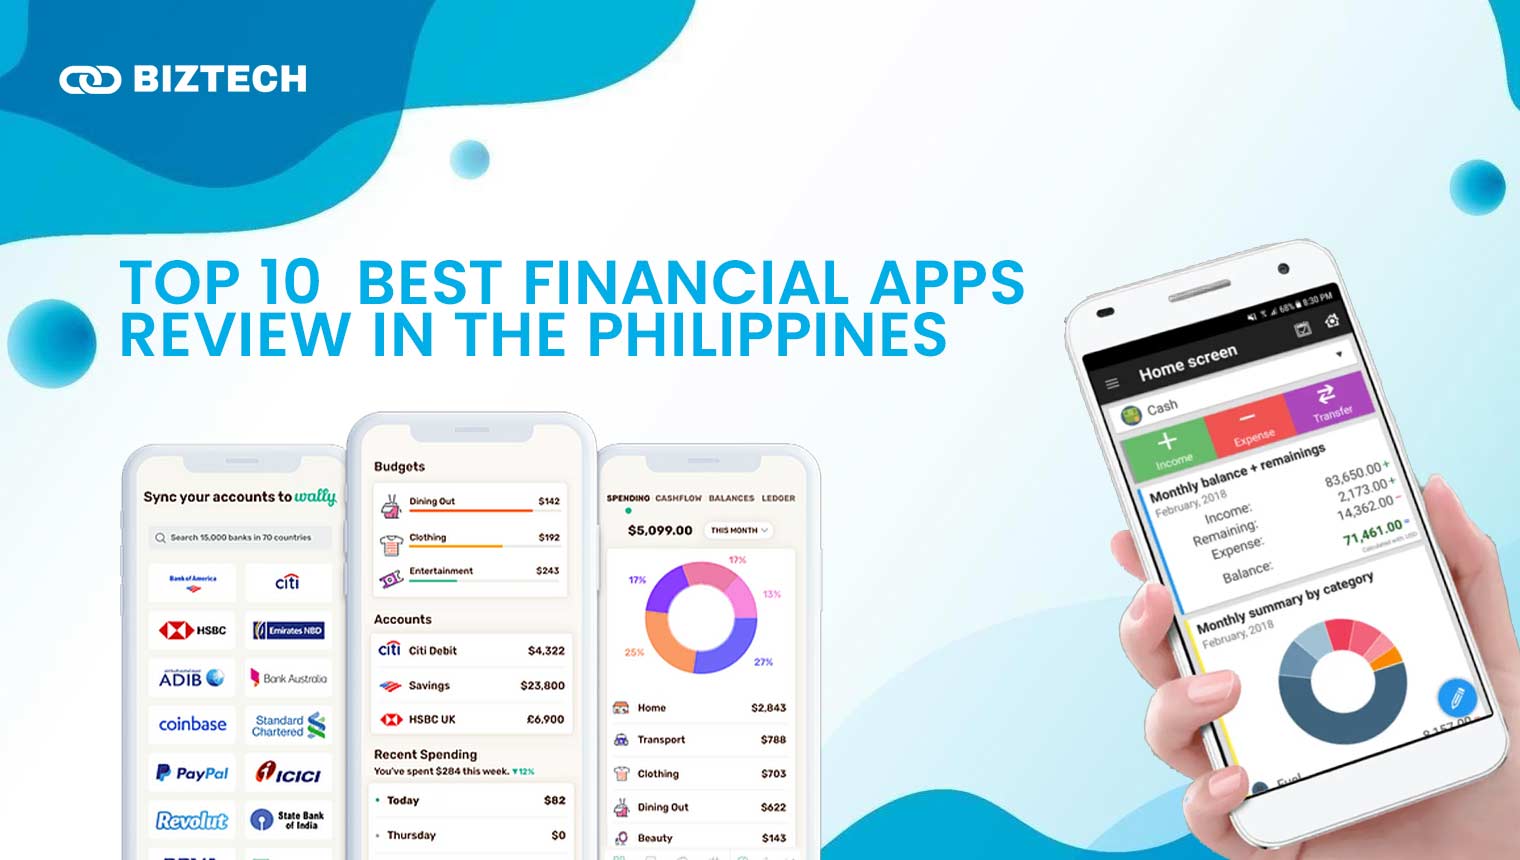 Best Financial Apps in the Philippines: 10 Must-Have Apps Reviewed